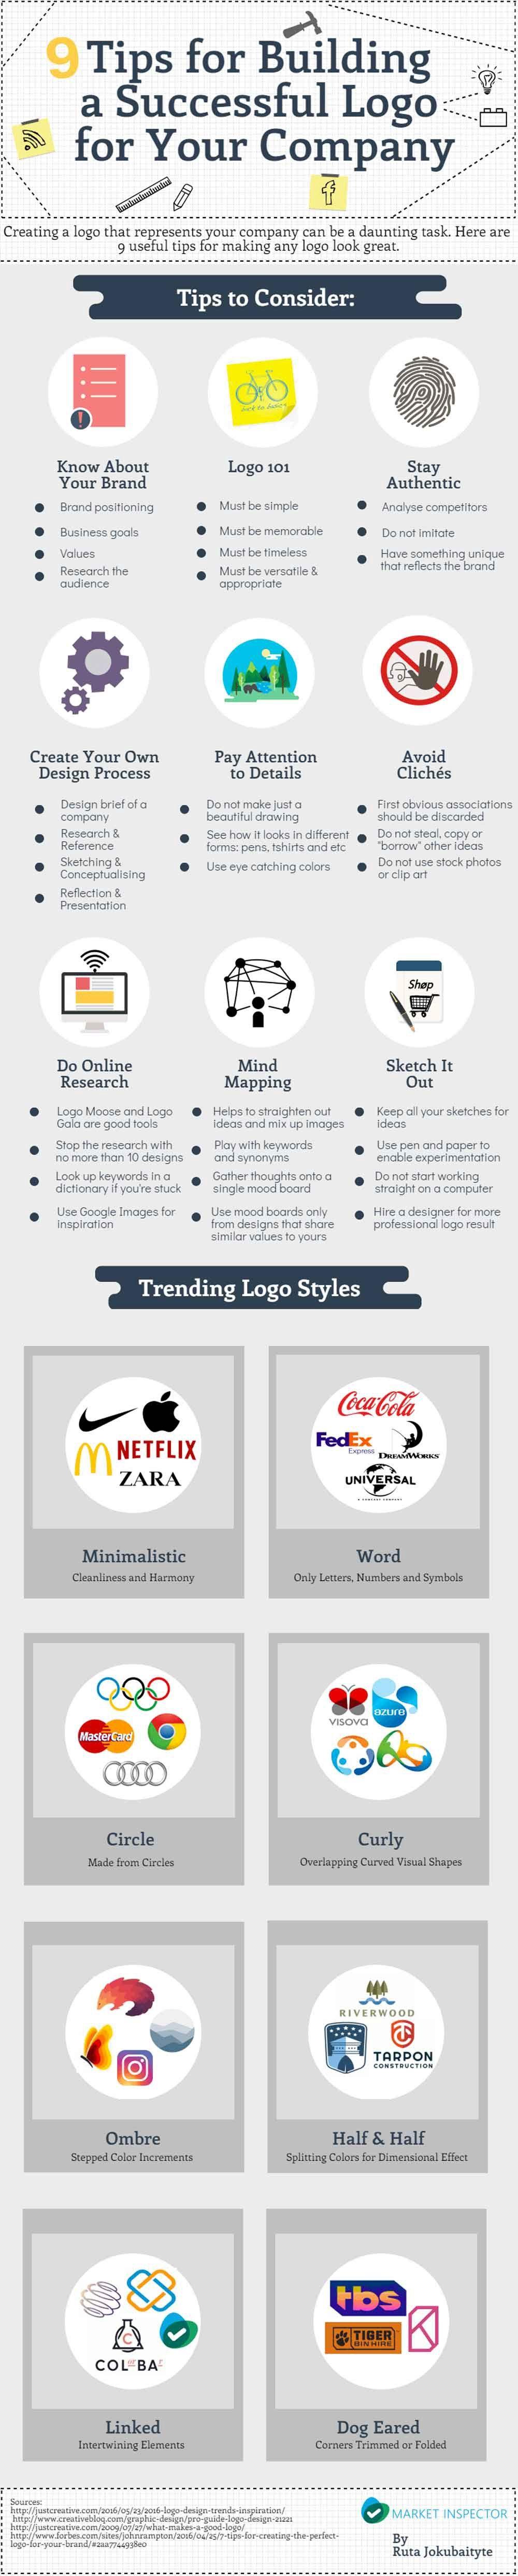 Consideration Logo - Tips for Creating a Successful Logo Design